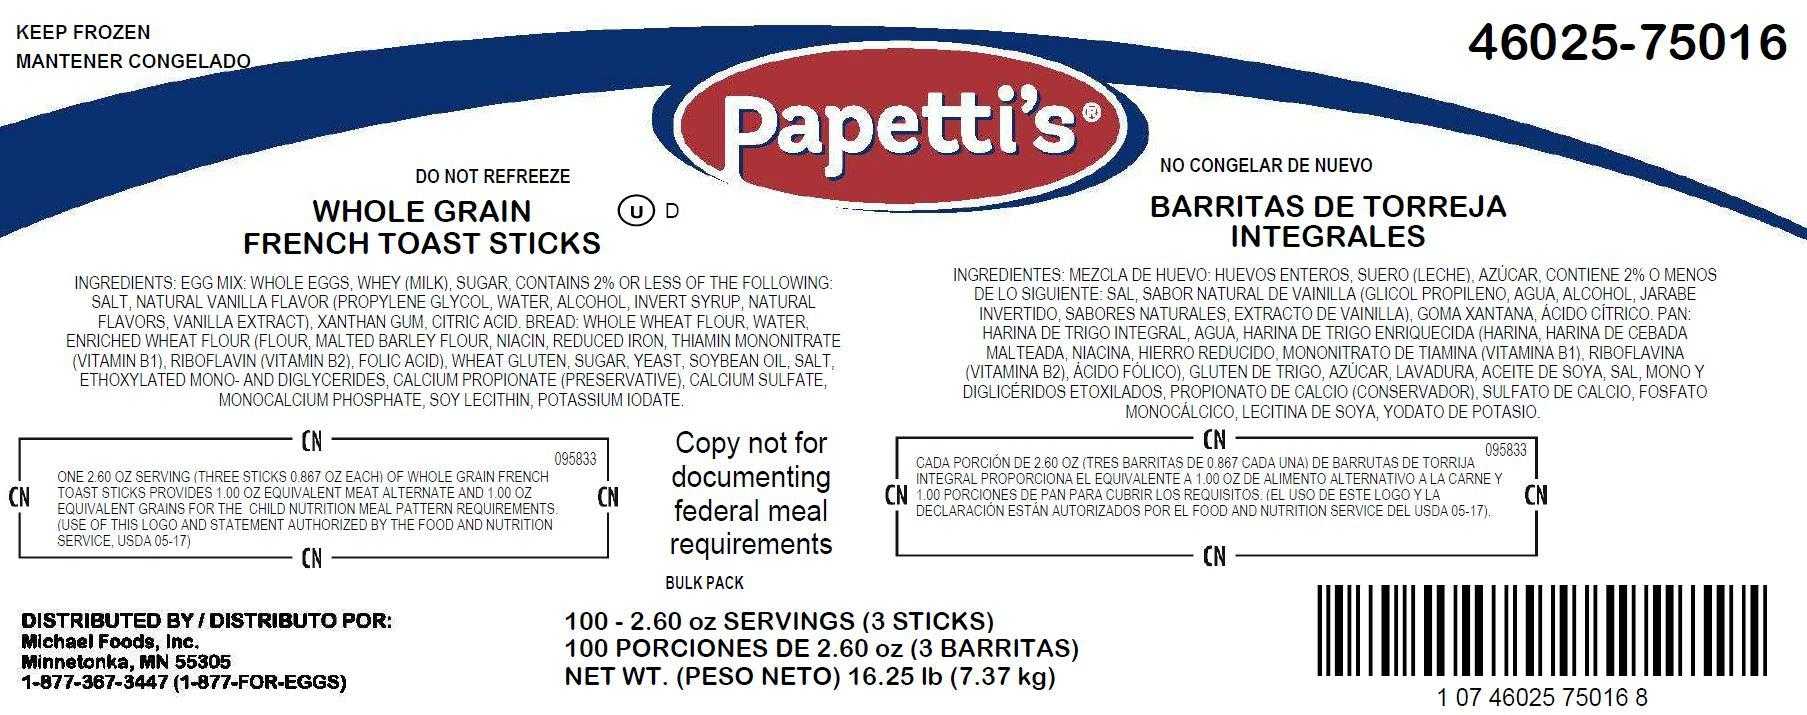 Papetti’s® Fully-Cooked Whole Grain Plain French Toast Sticks, CN, 100/2.6 Oz CN Labeled PDF